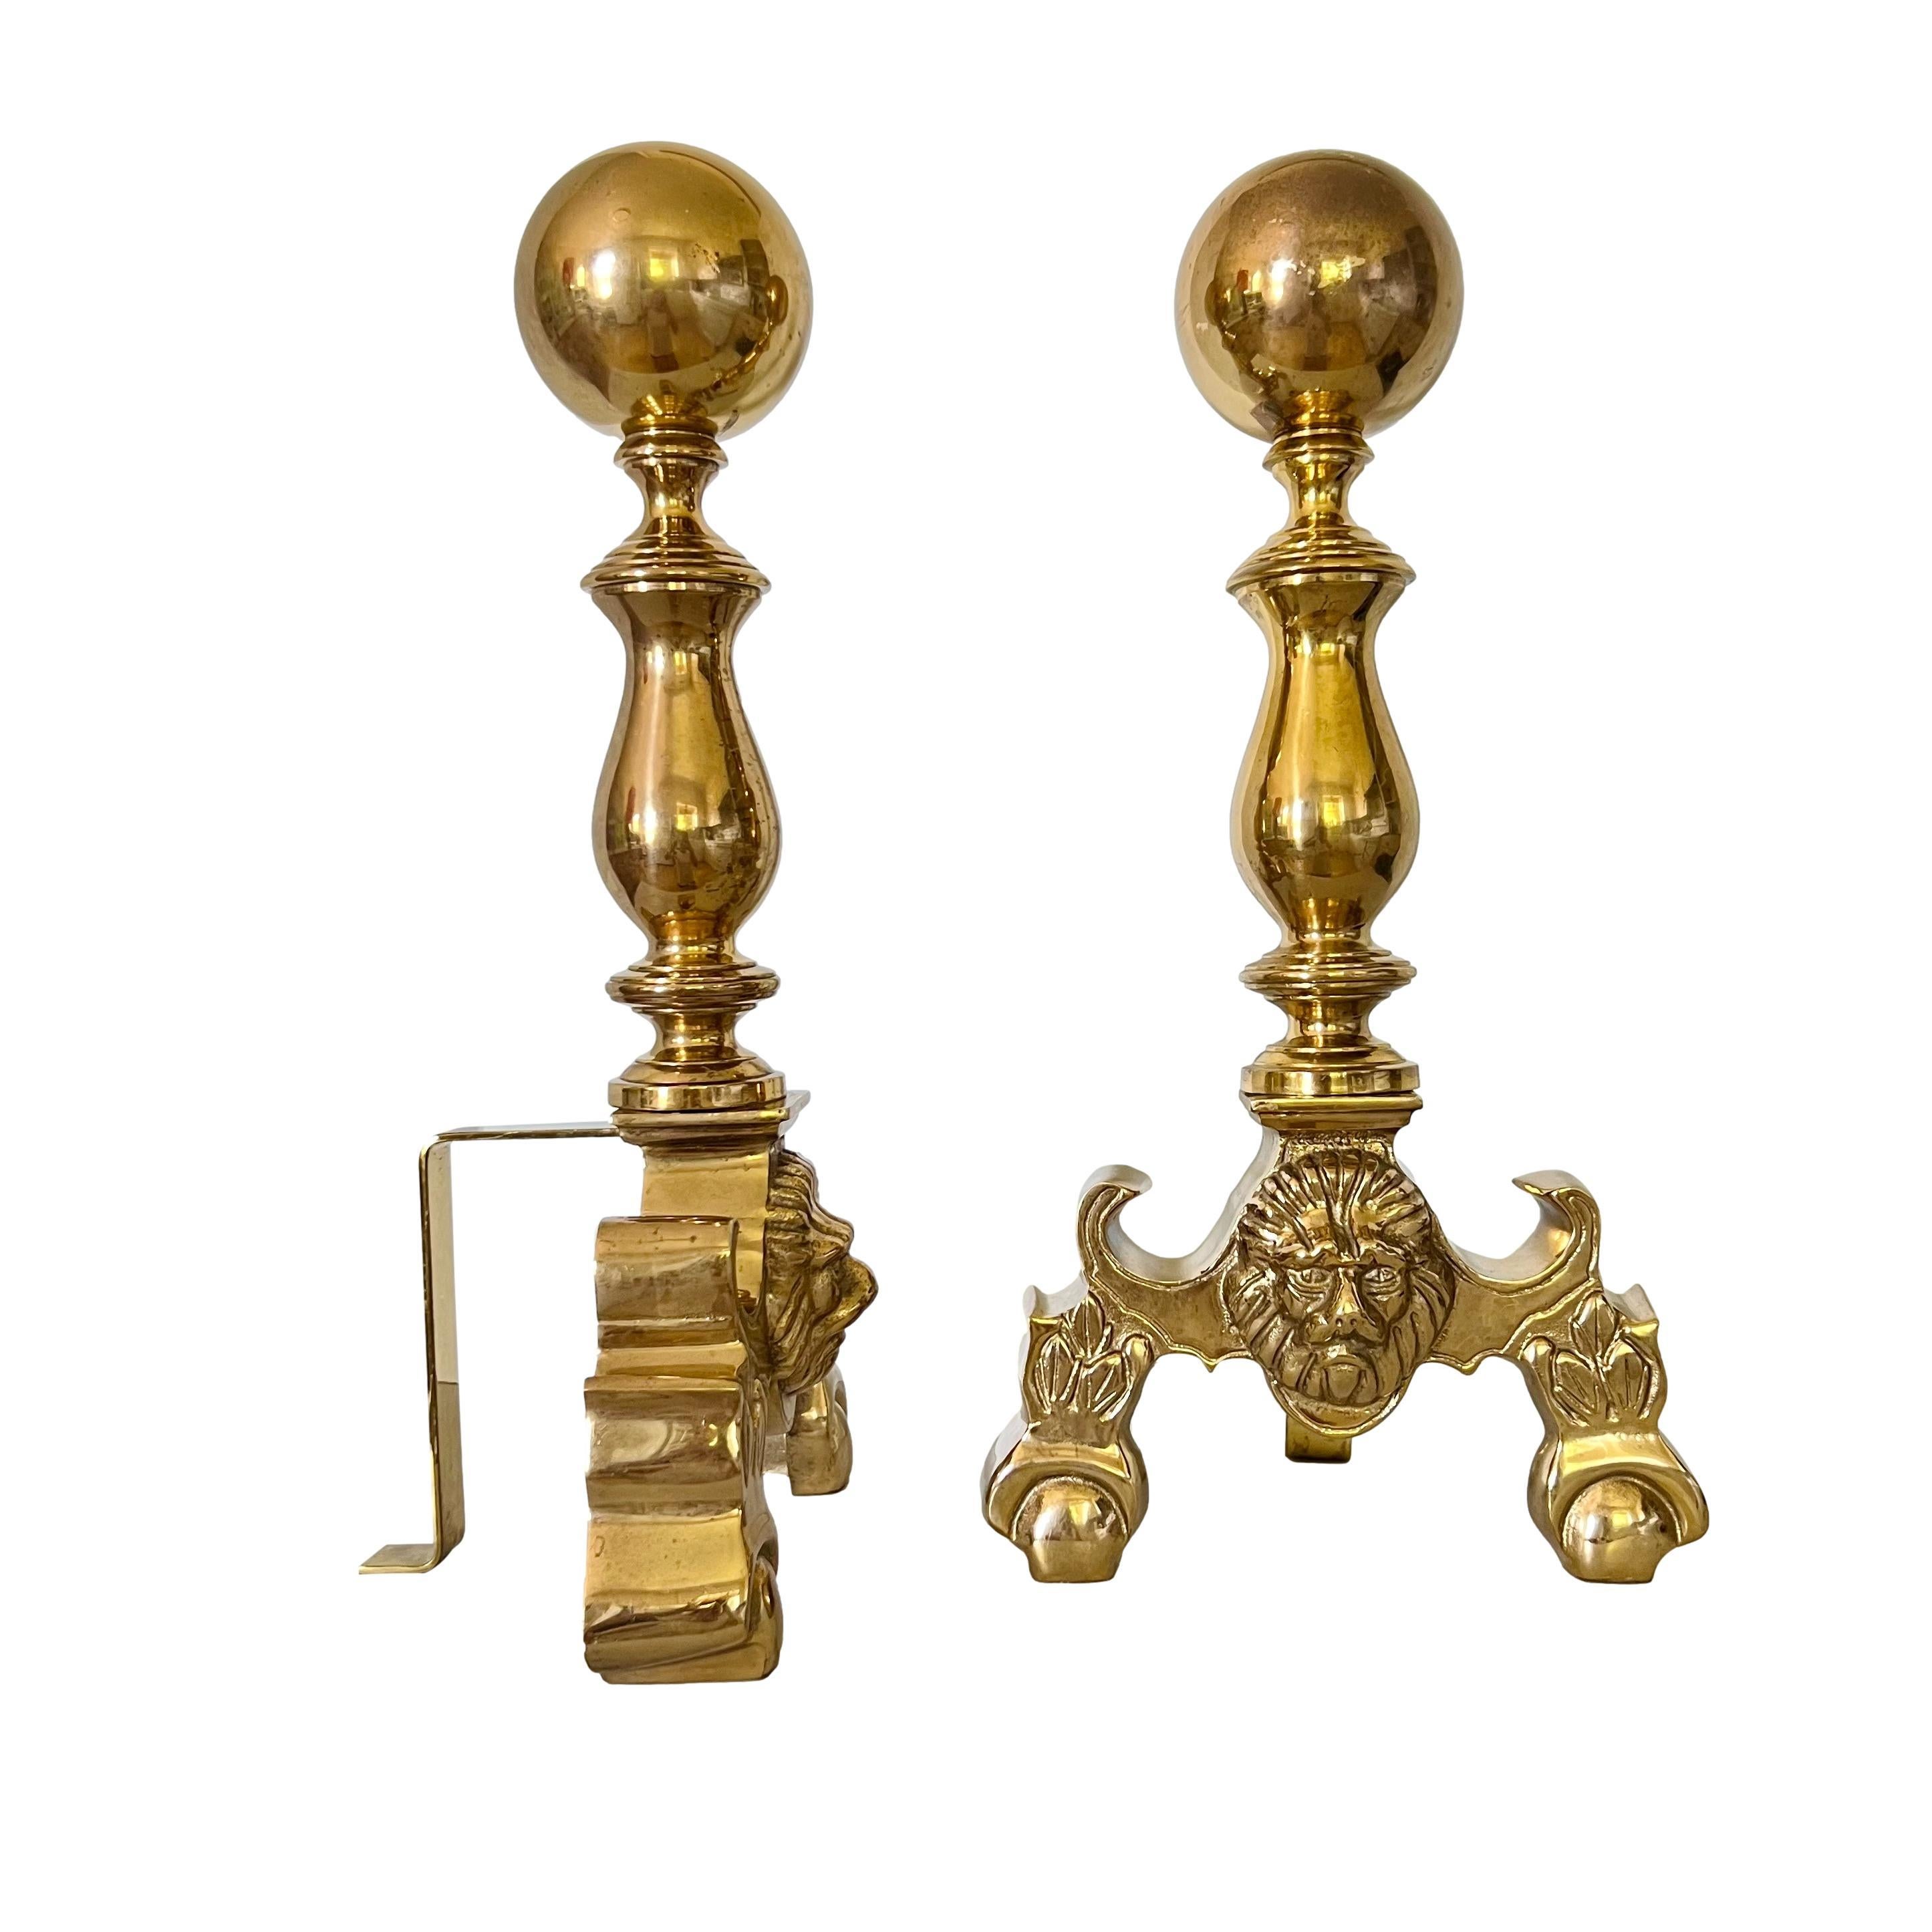 Cast Mid 20th Century French Empire Brass Cannonball Chenets Andirons, a Pair For Sale